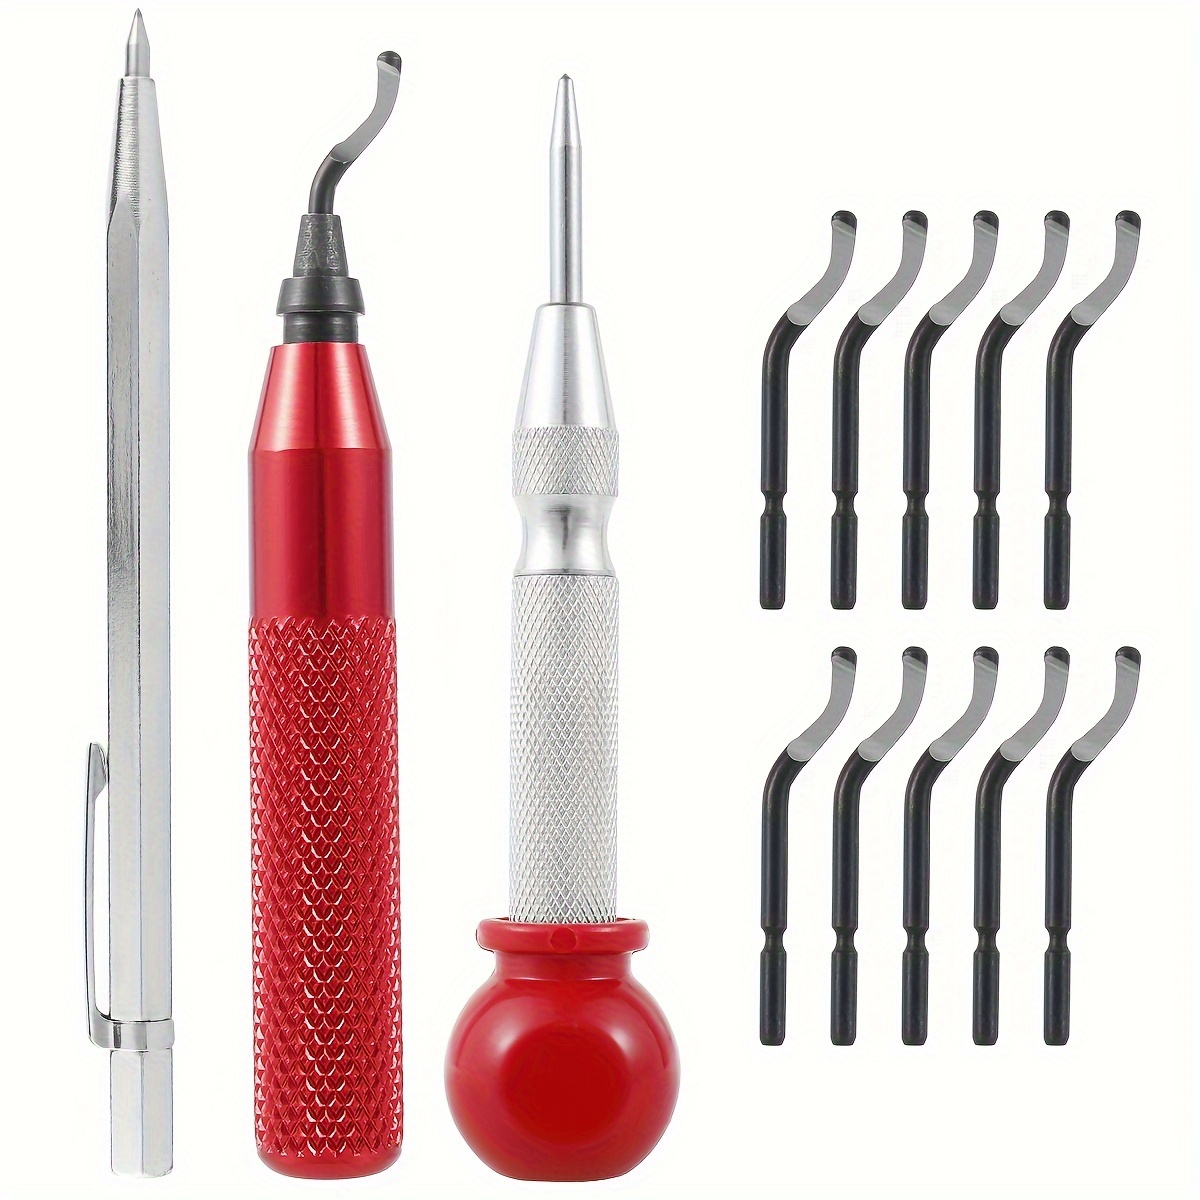 Hand Metal Deburring Tool Kit Burr Remover with 11pcs Rotary Deburr K1I1